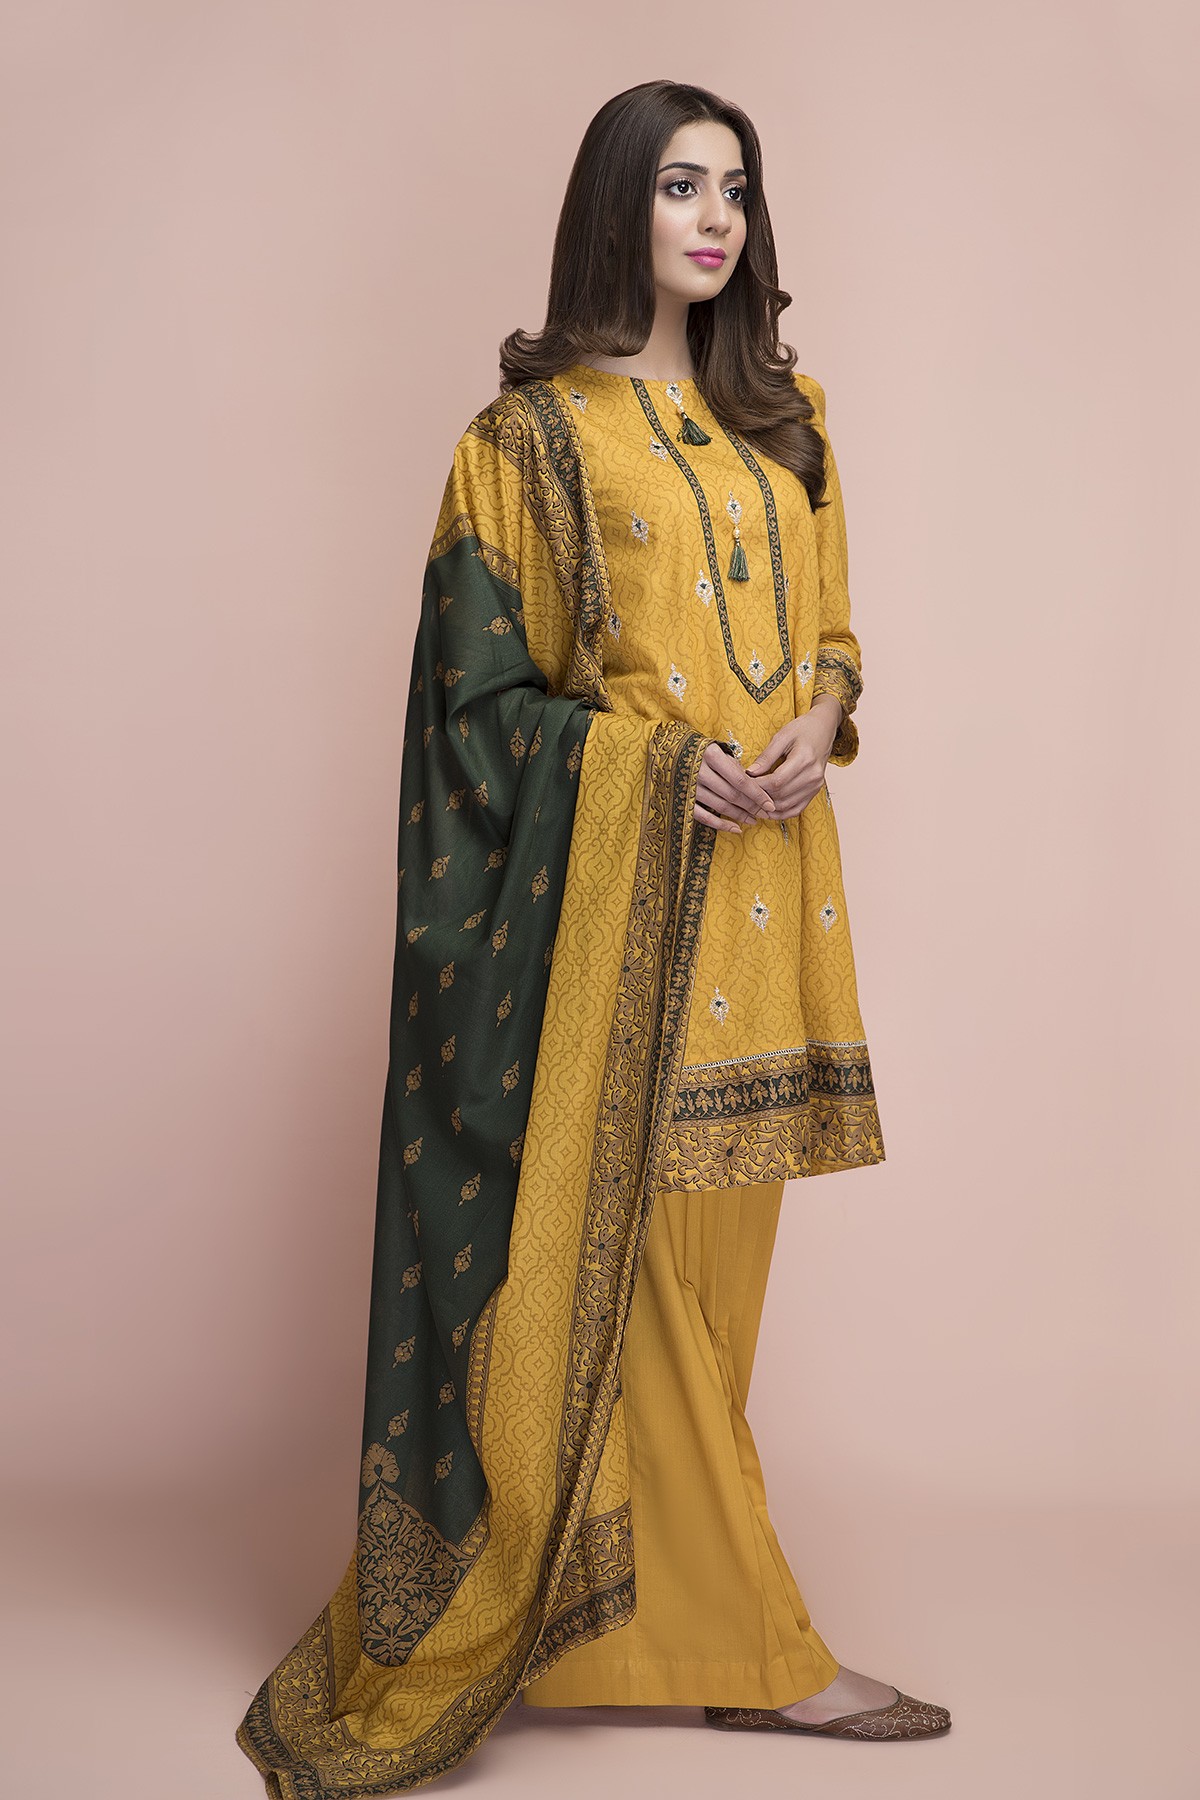 Latest Kayseria Eid Collection 2022 With Price Catalogue